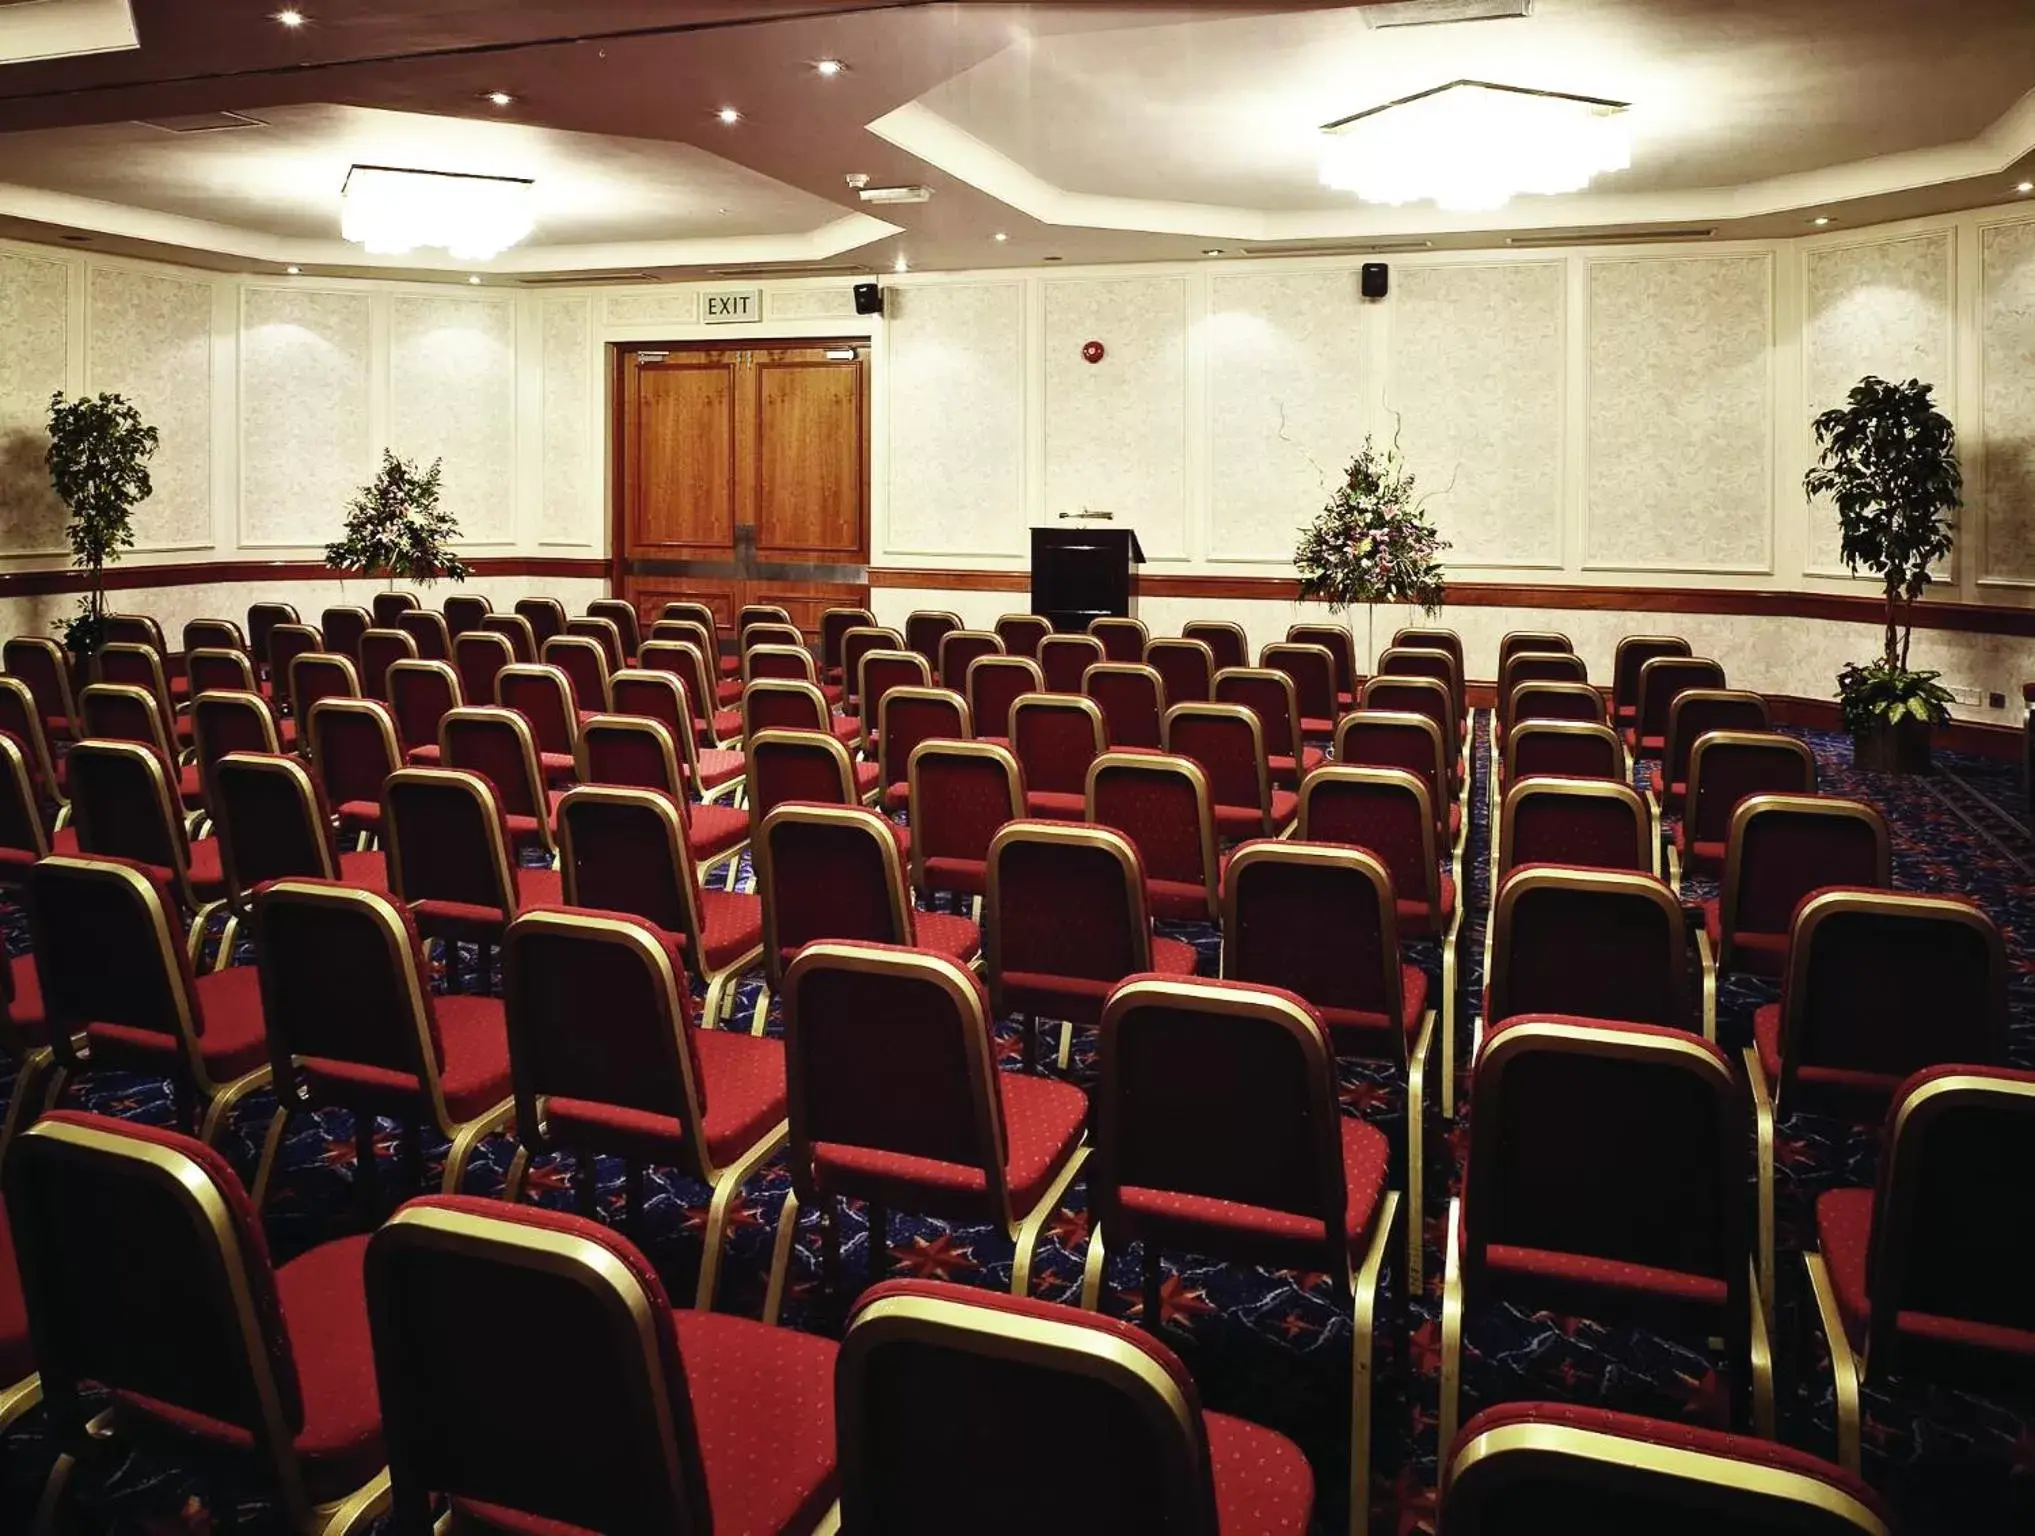 Business facilities in Copthorne Hotel Manchester Salford Quays